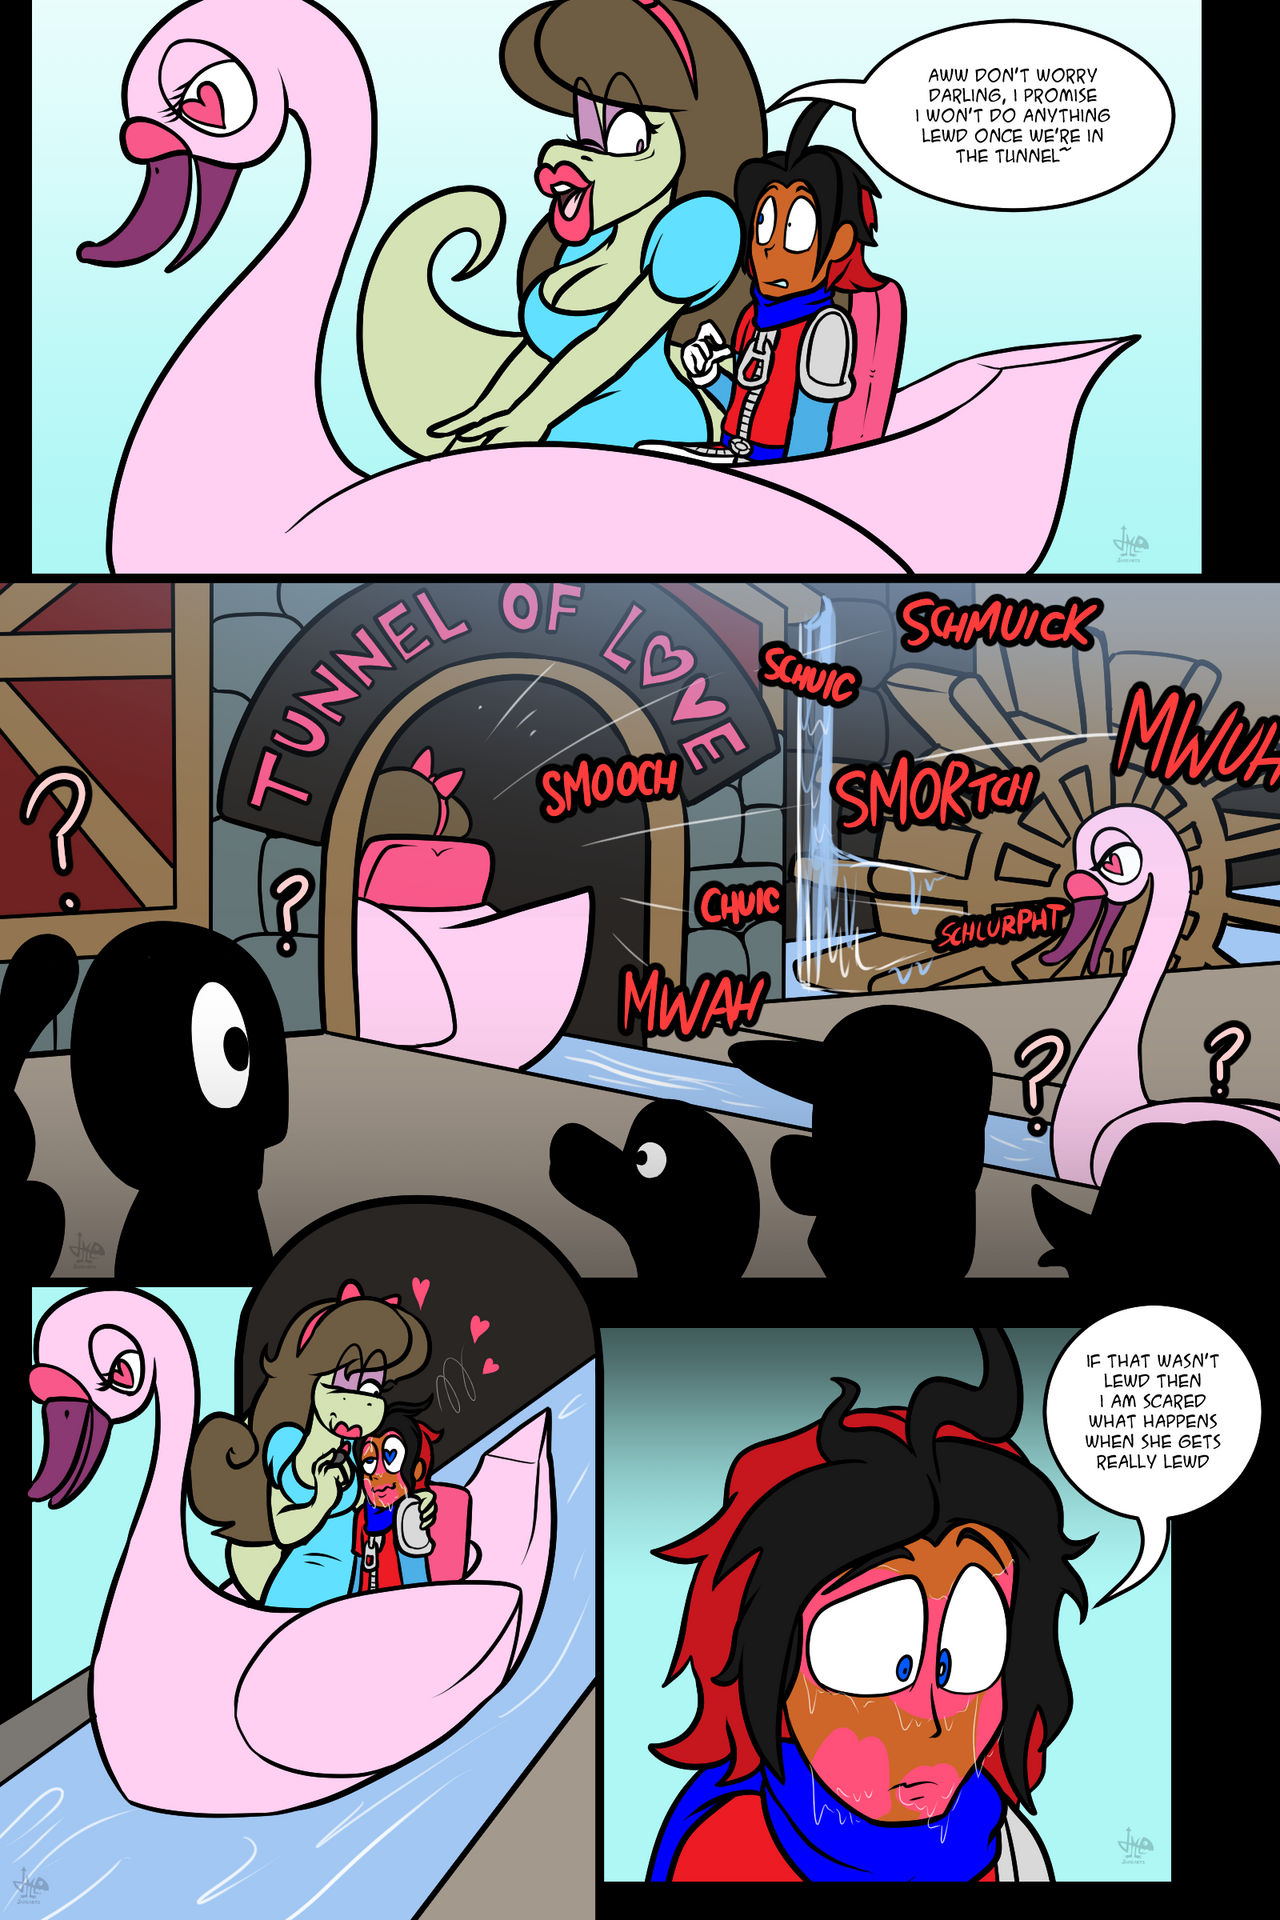 Jam (First Kiss at a Spooky Soiree) by FeralRAD on DeviantArt